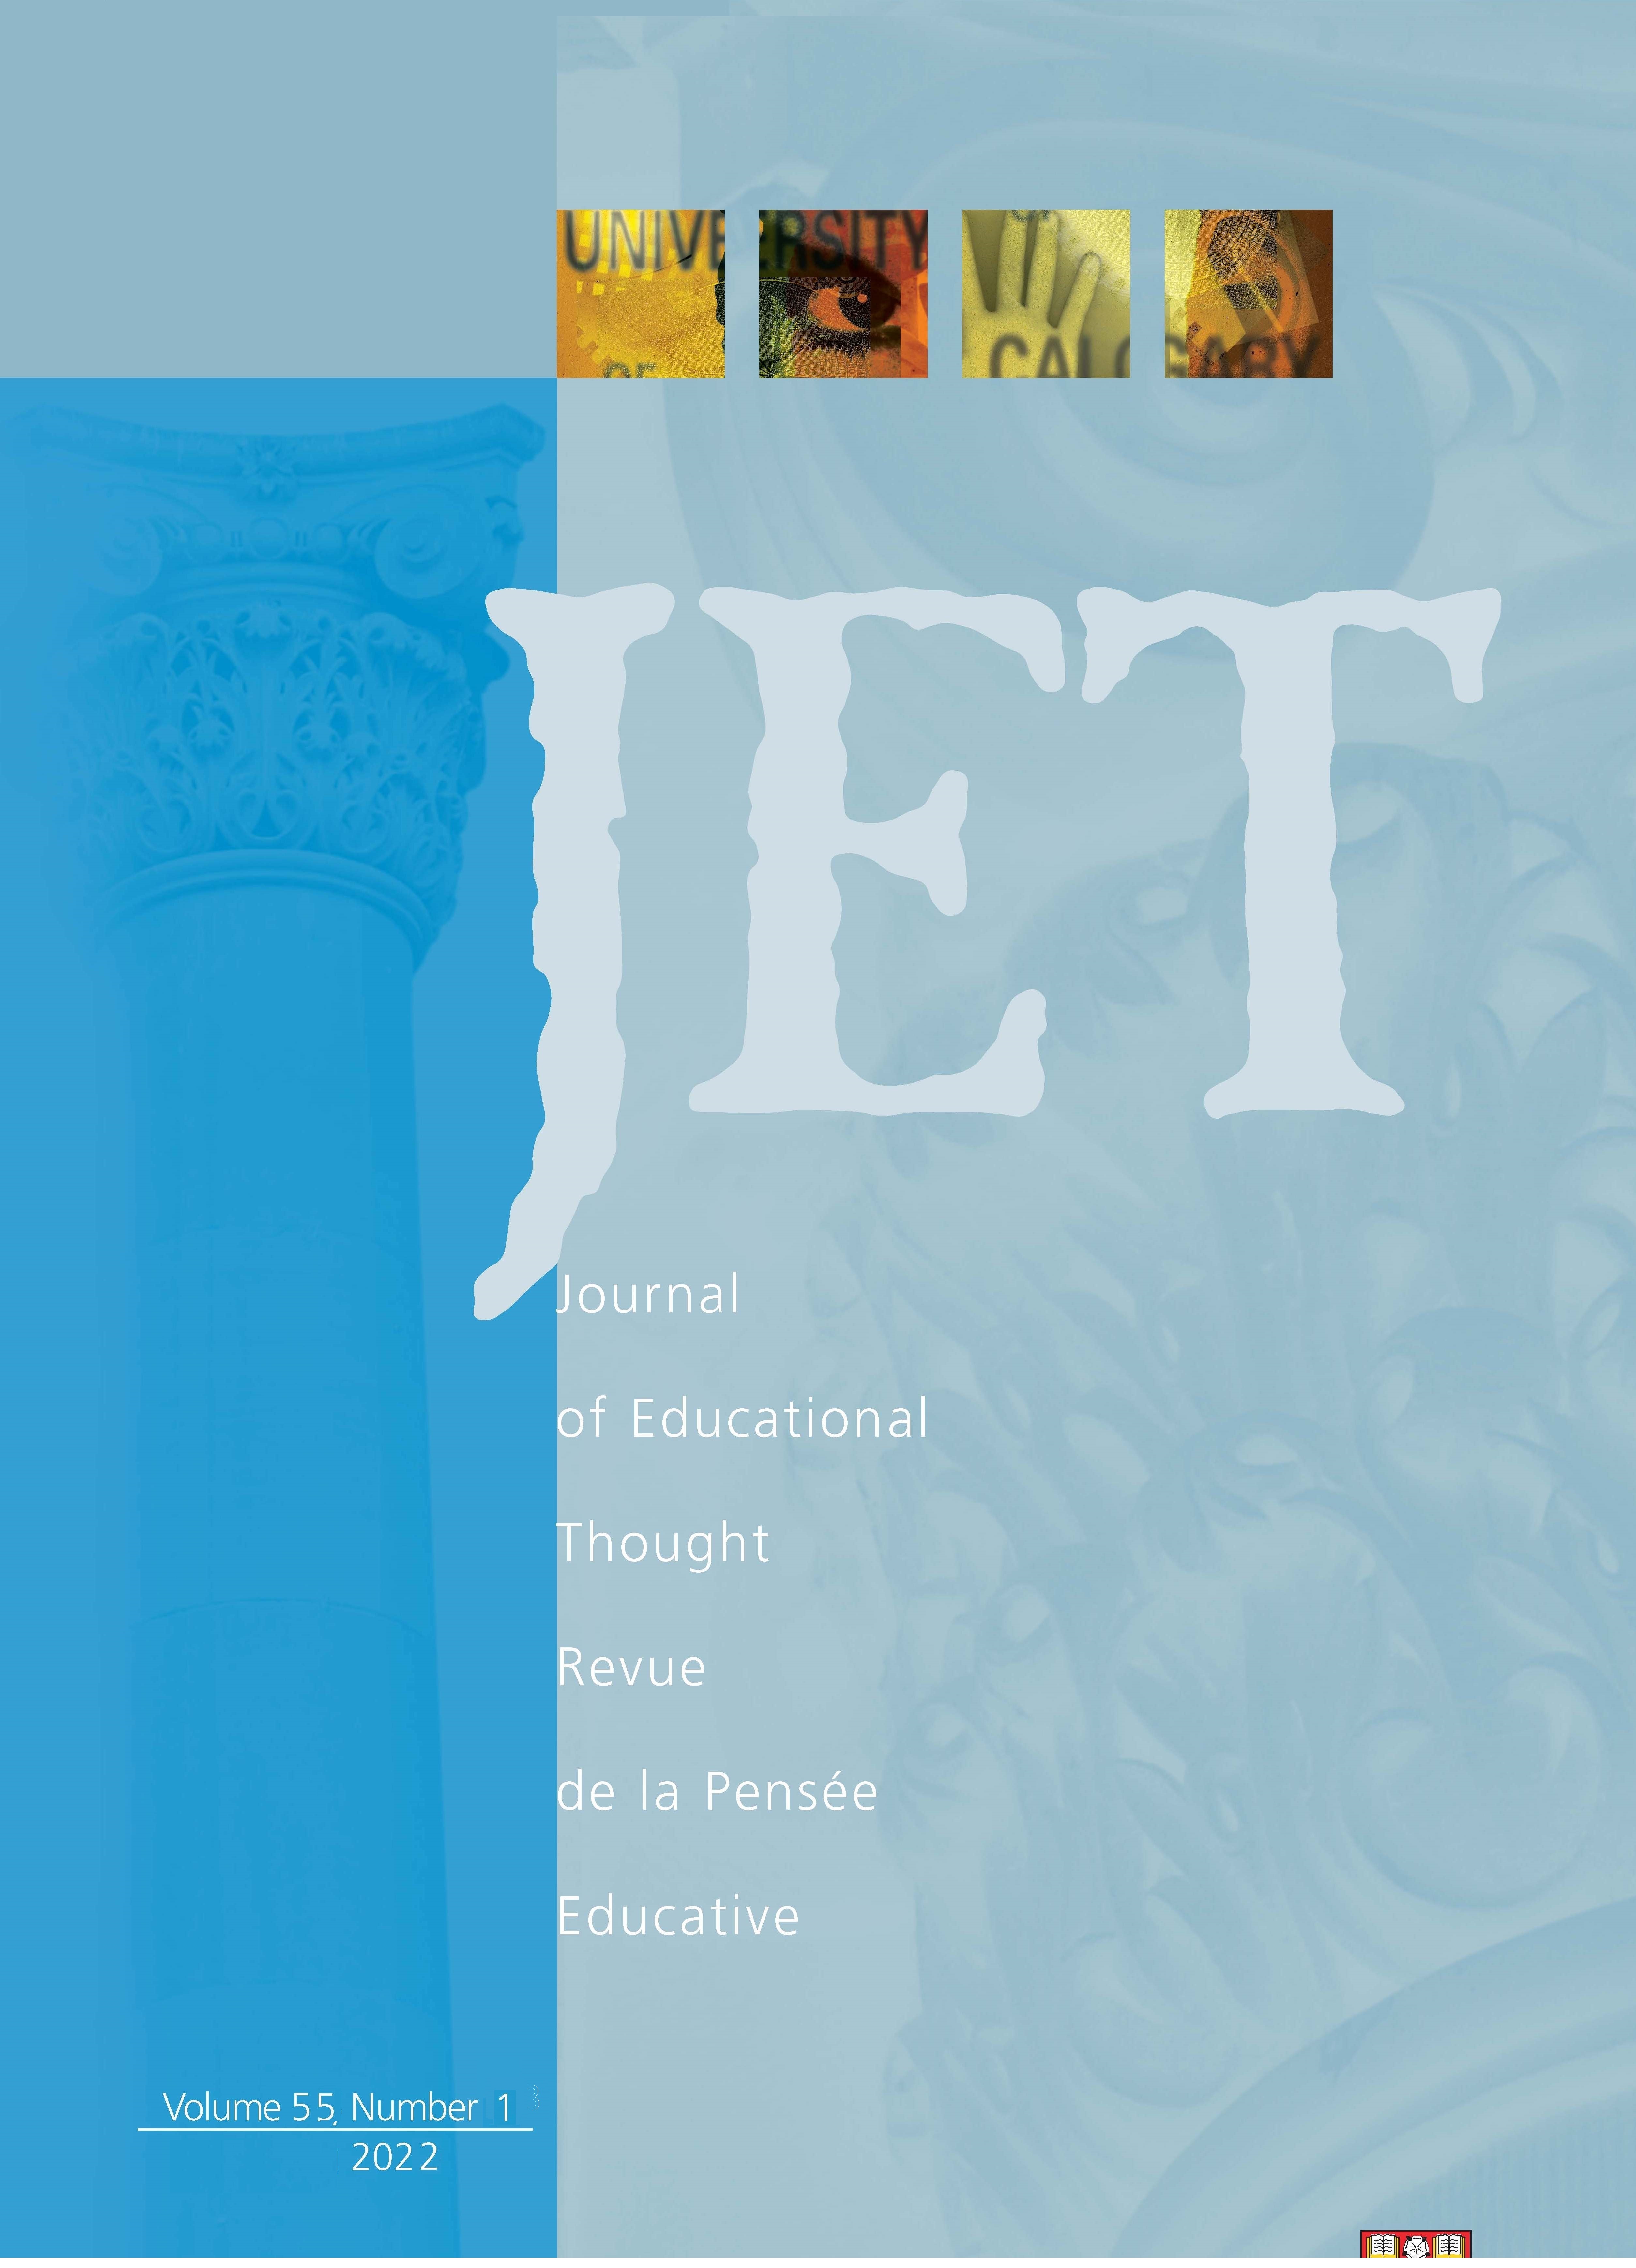 					Afficher Vol. 55 No. 1 (2022): Journal of Educational Thought
				